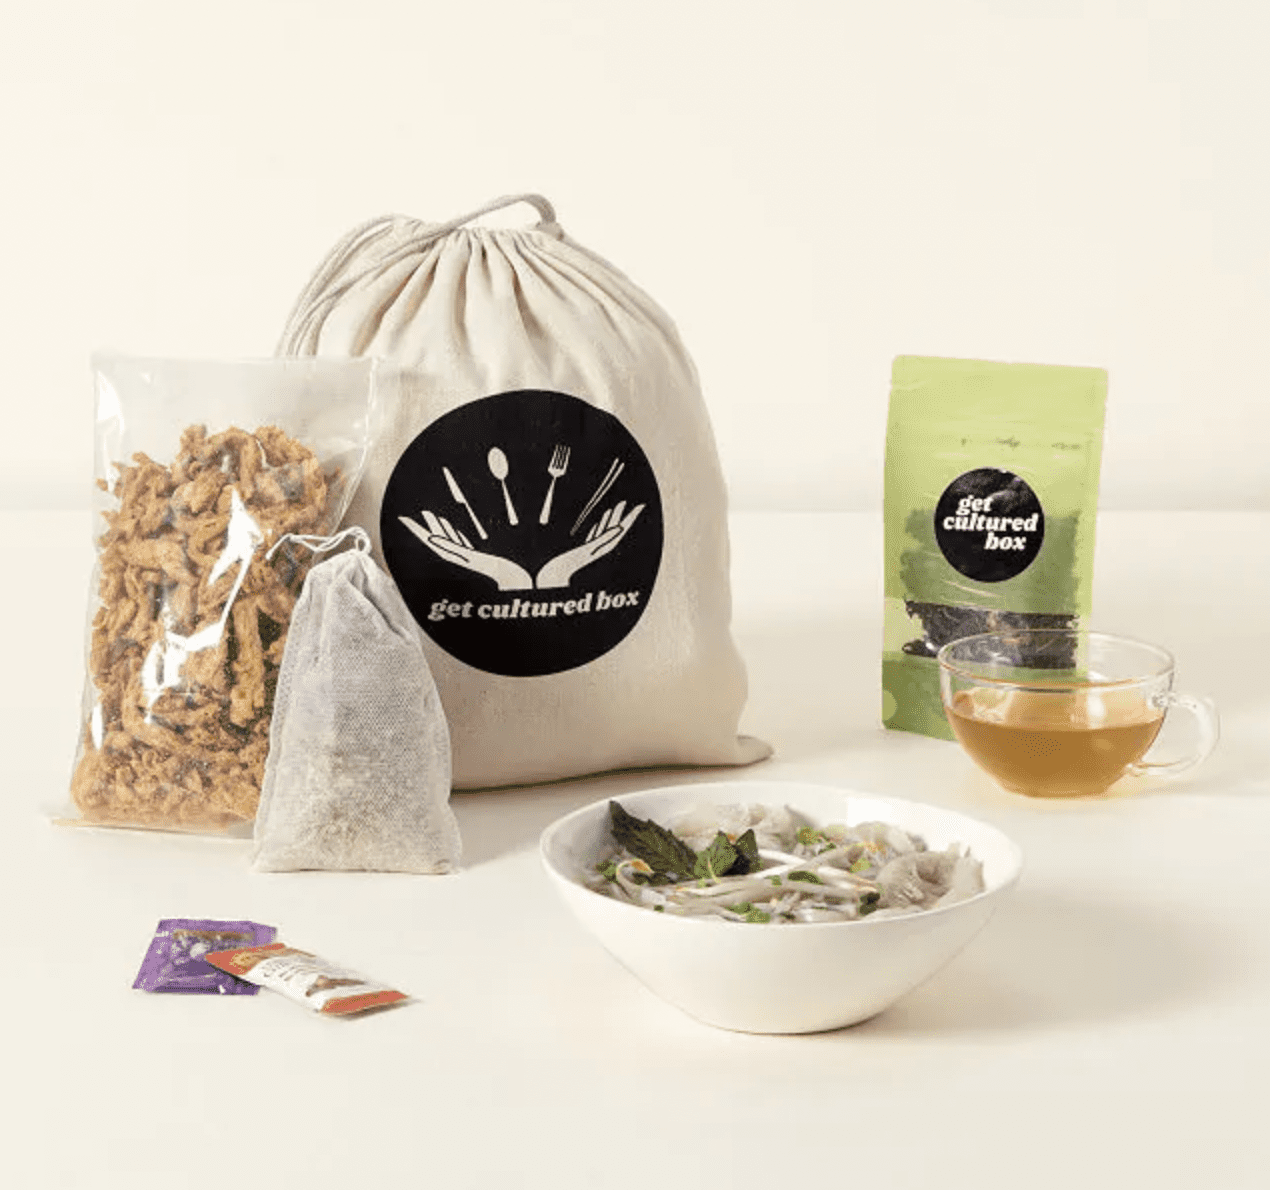 These Uncommon Goods DIY Food and Drink Kits Make Great Gifts